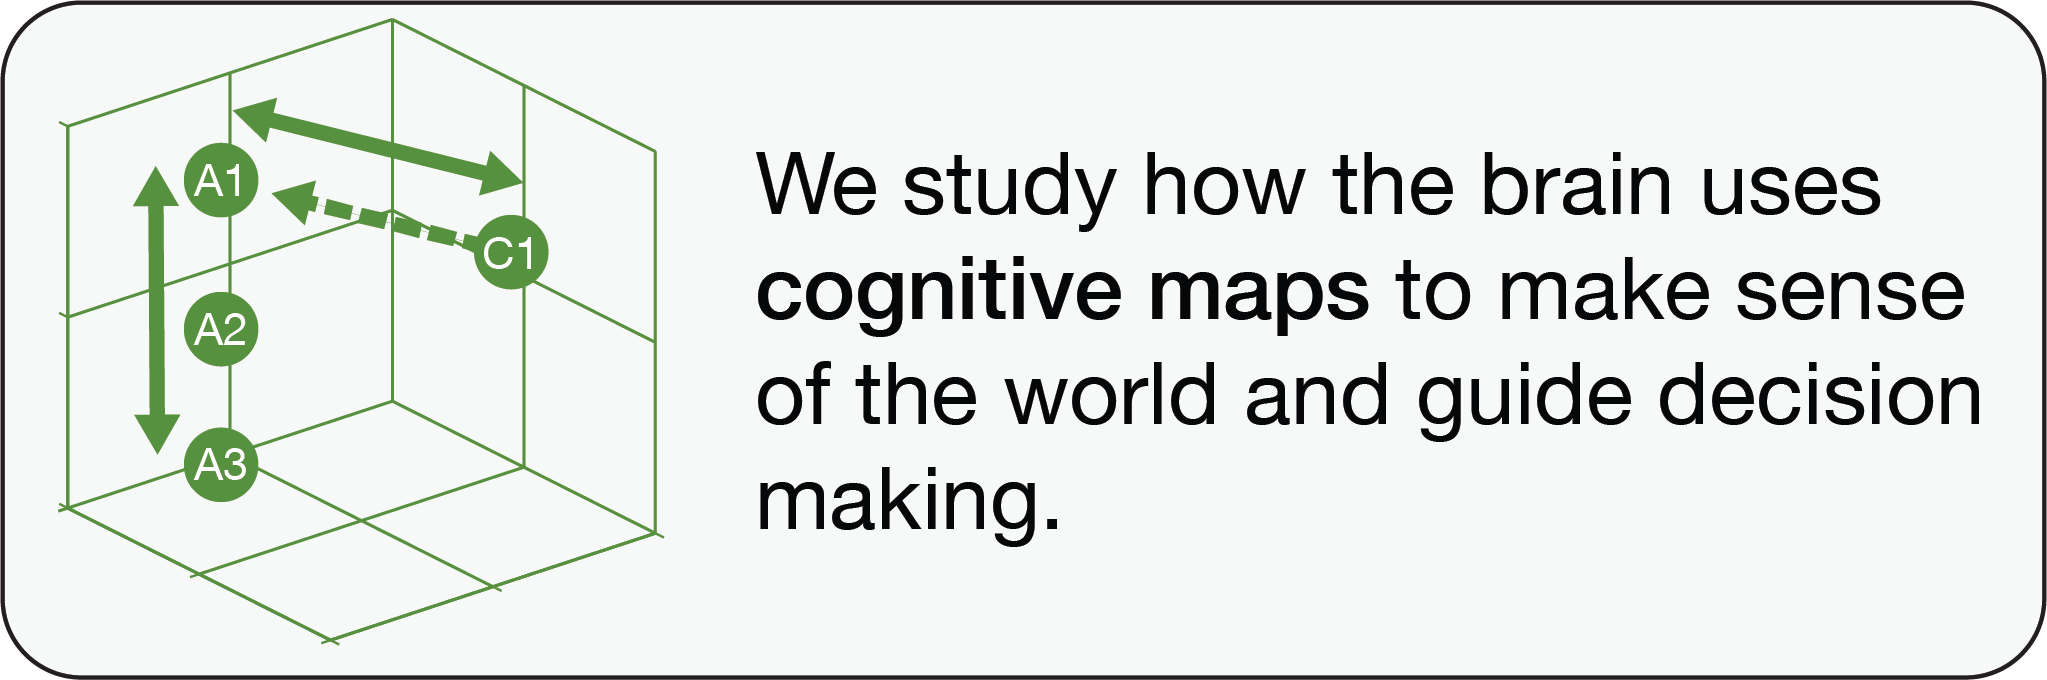 We study how the brain uses cognitive maps to make sense of the world and guide decision making.